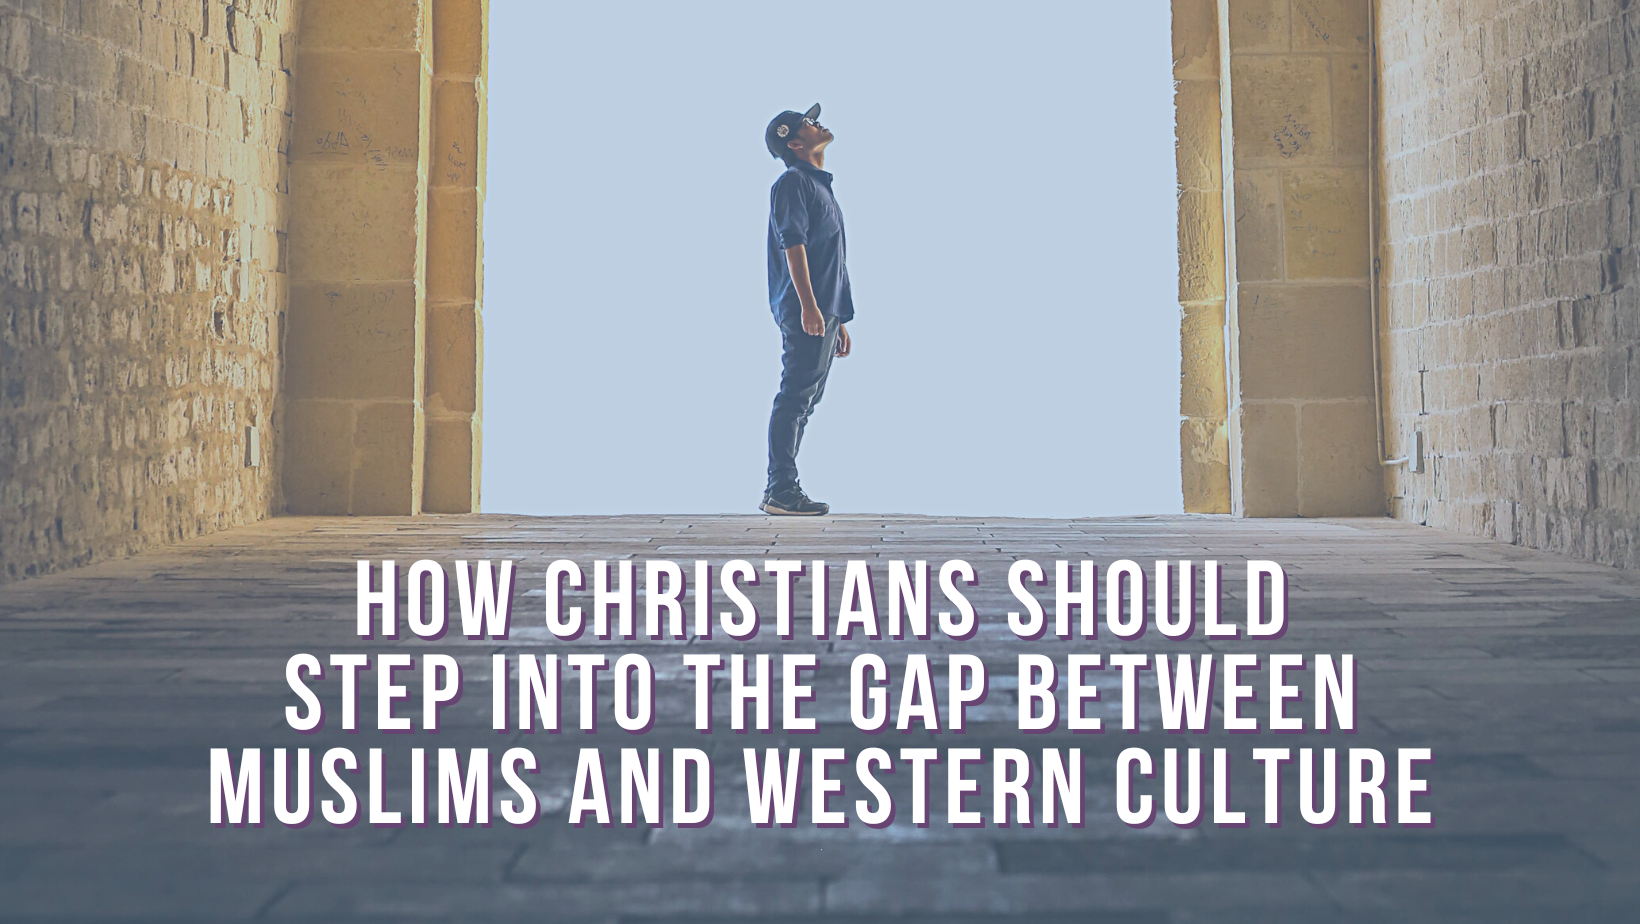 How Christians should step into the gap between Muslims and Western culture